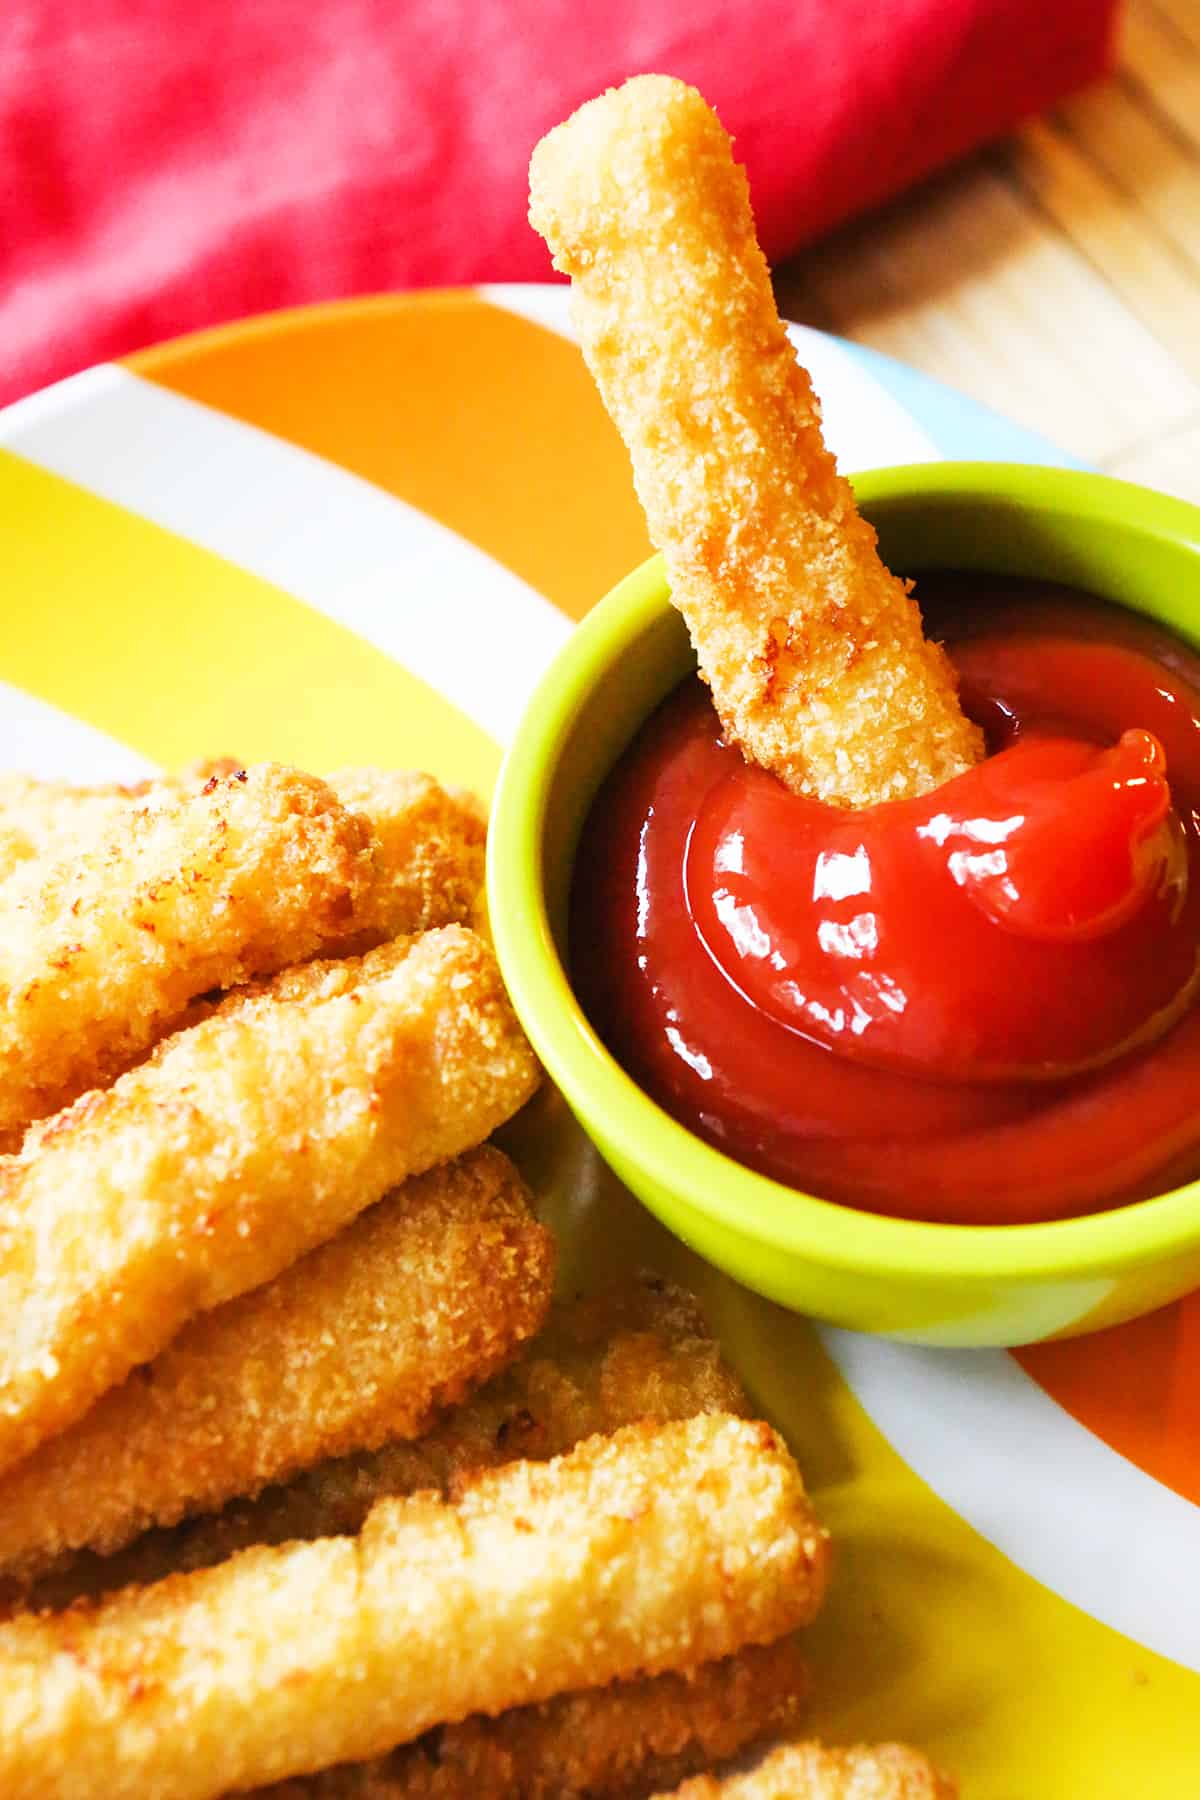 A single fish stick being dipped into a small bowl of ketchup.